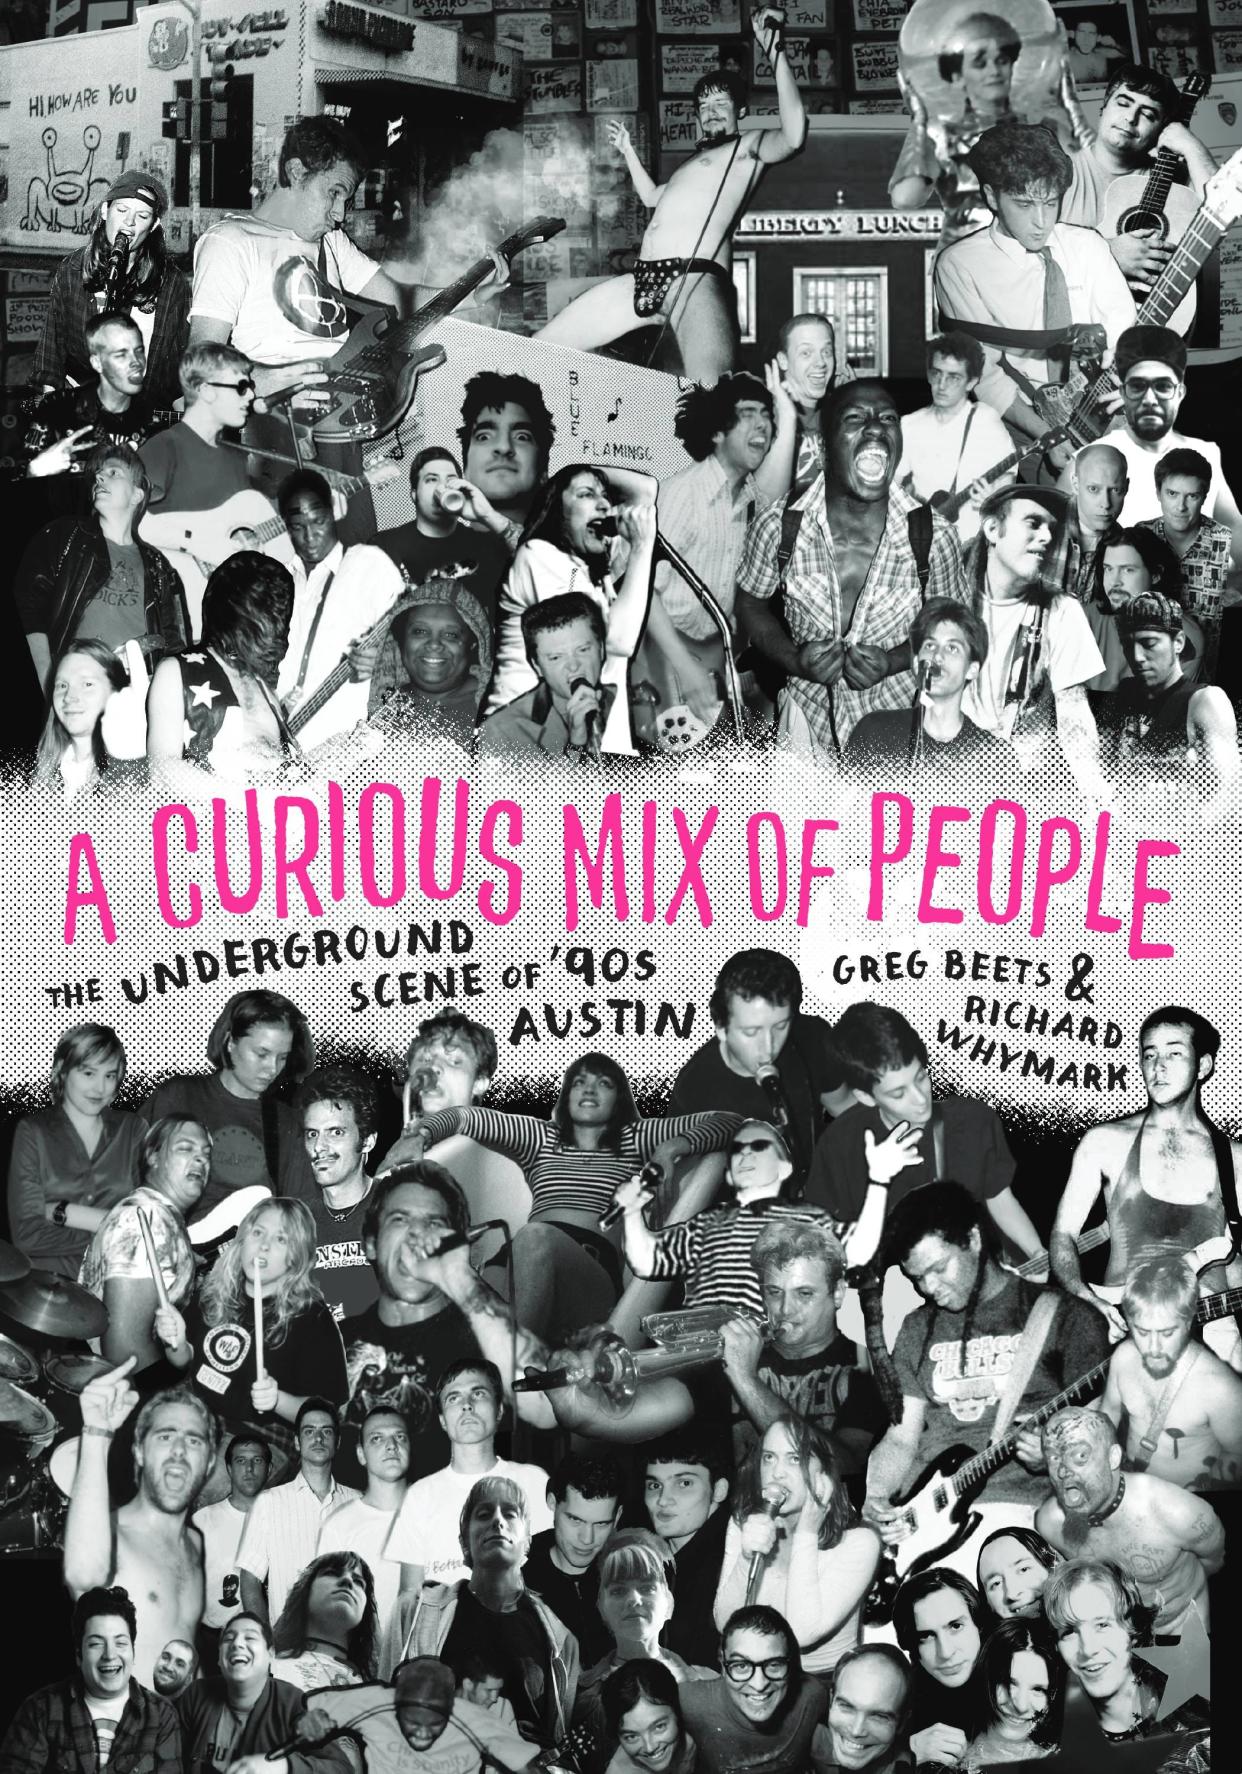 The new book "A Curious Mix of People: The Underground Scene of '90s Austin" explores the roots of Austin's indie rock and punk music scenes with an emphasis on the part of town that would eventually become the Red River Cultural District.